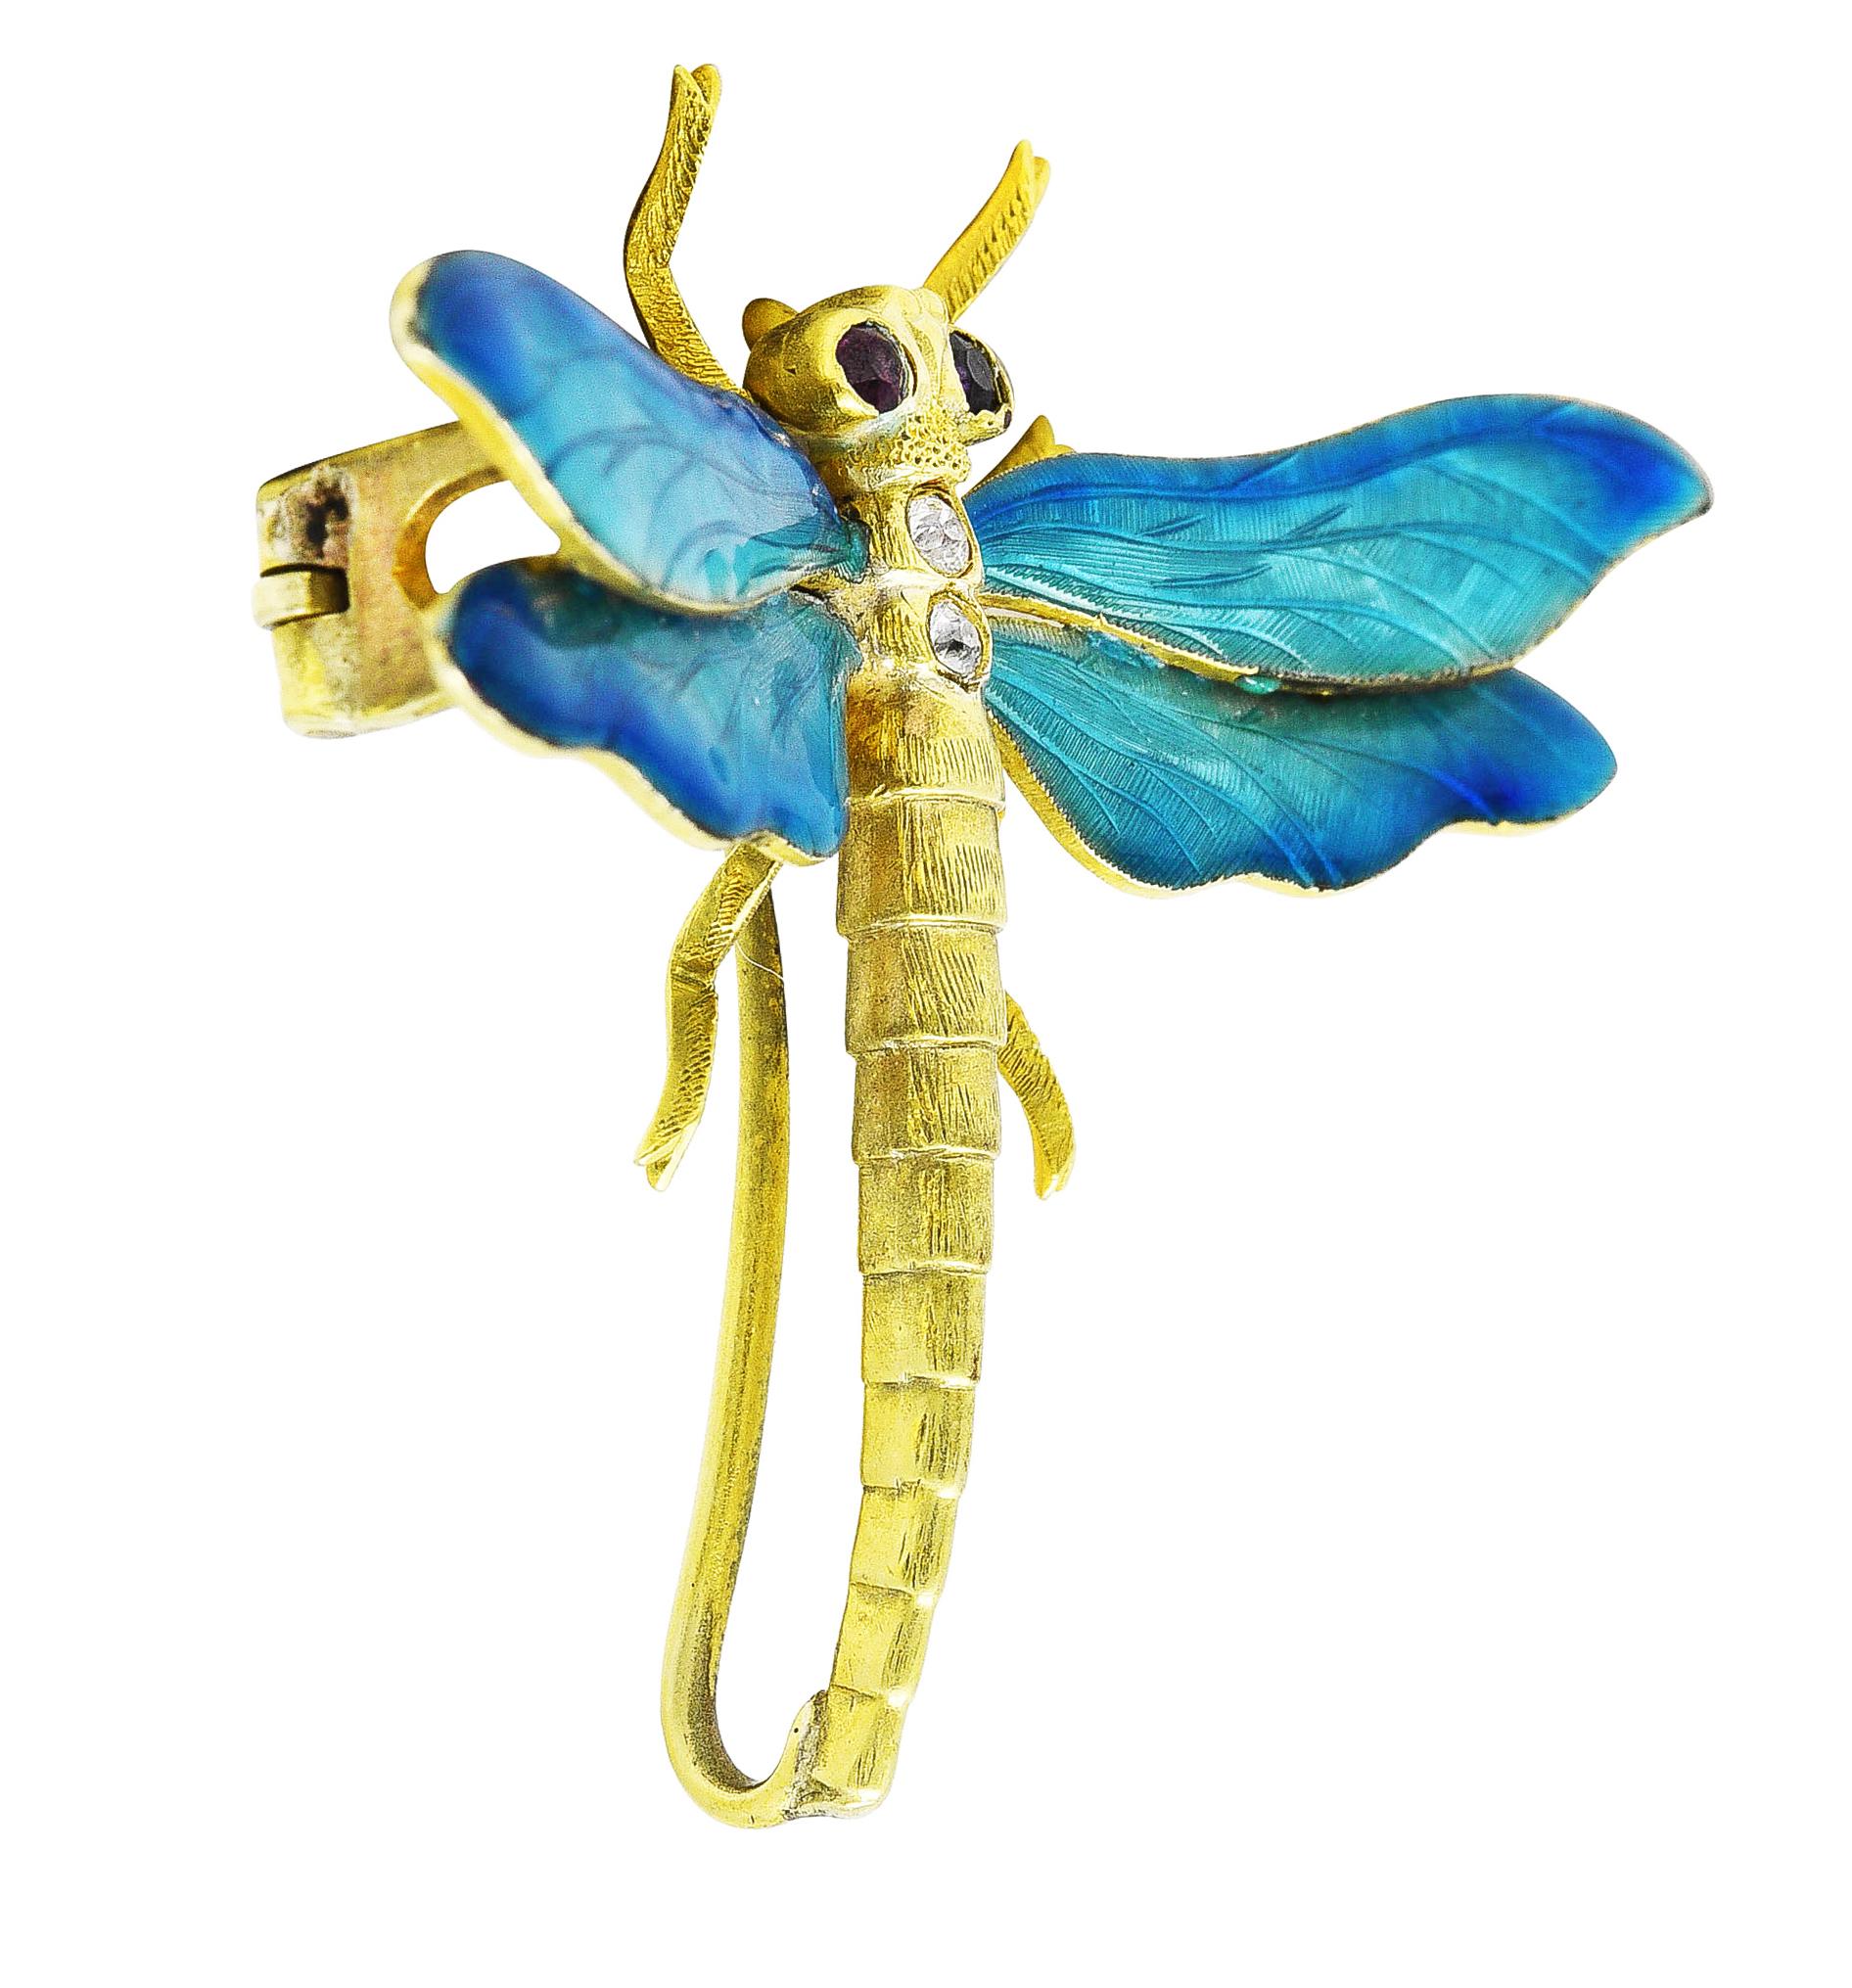 Brooch is designed as a stylized dragonfly with a stepped body and textured engraving throughout. Featuring wings with guilloche enamel - transparent medium to light blue ombrè over linear engraving. With flush set old European cut diamonds in back